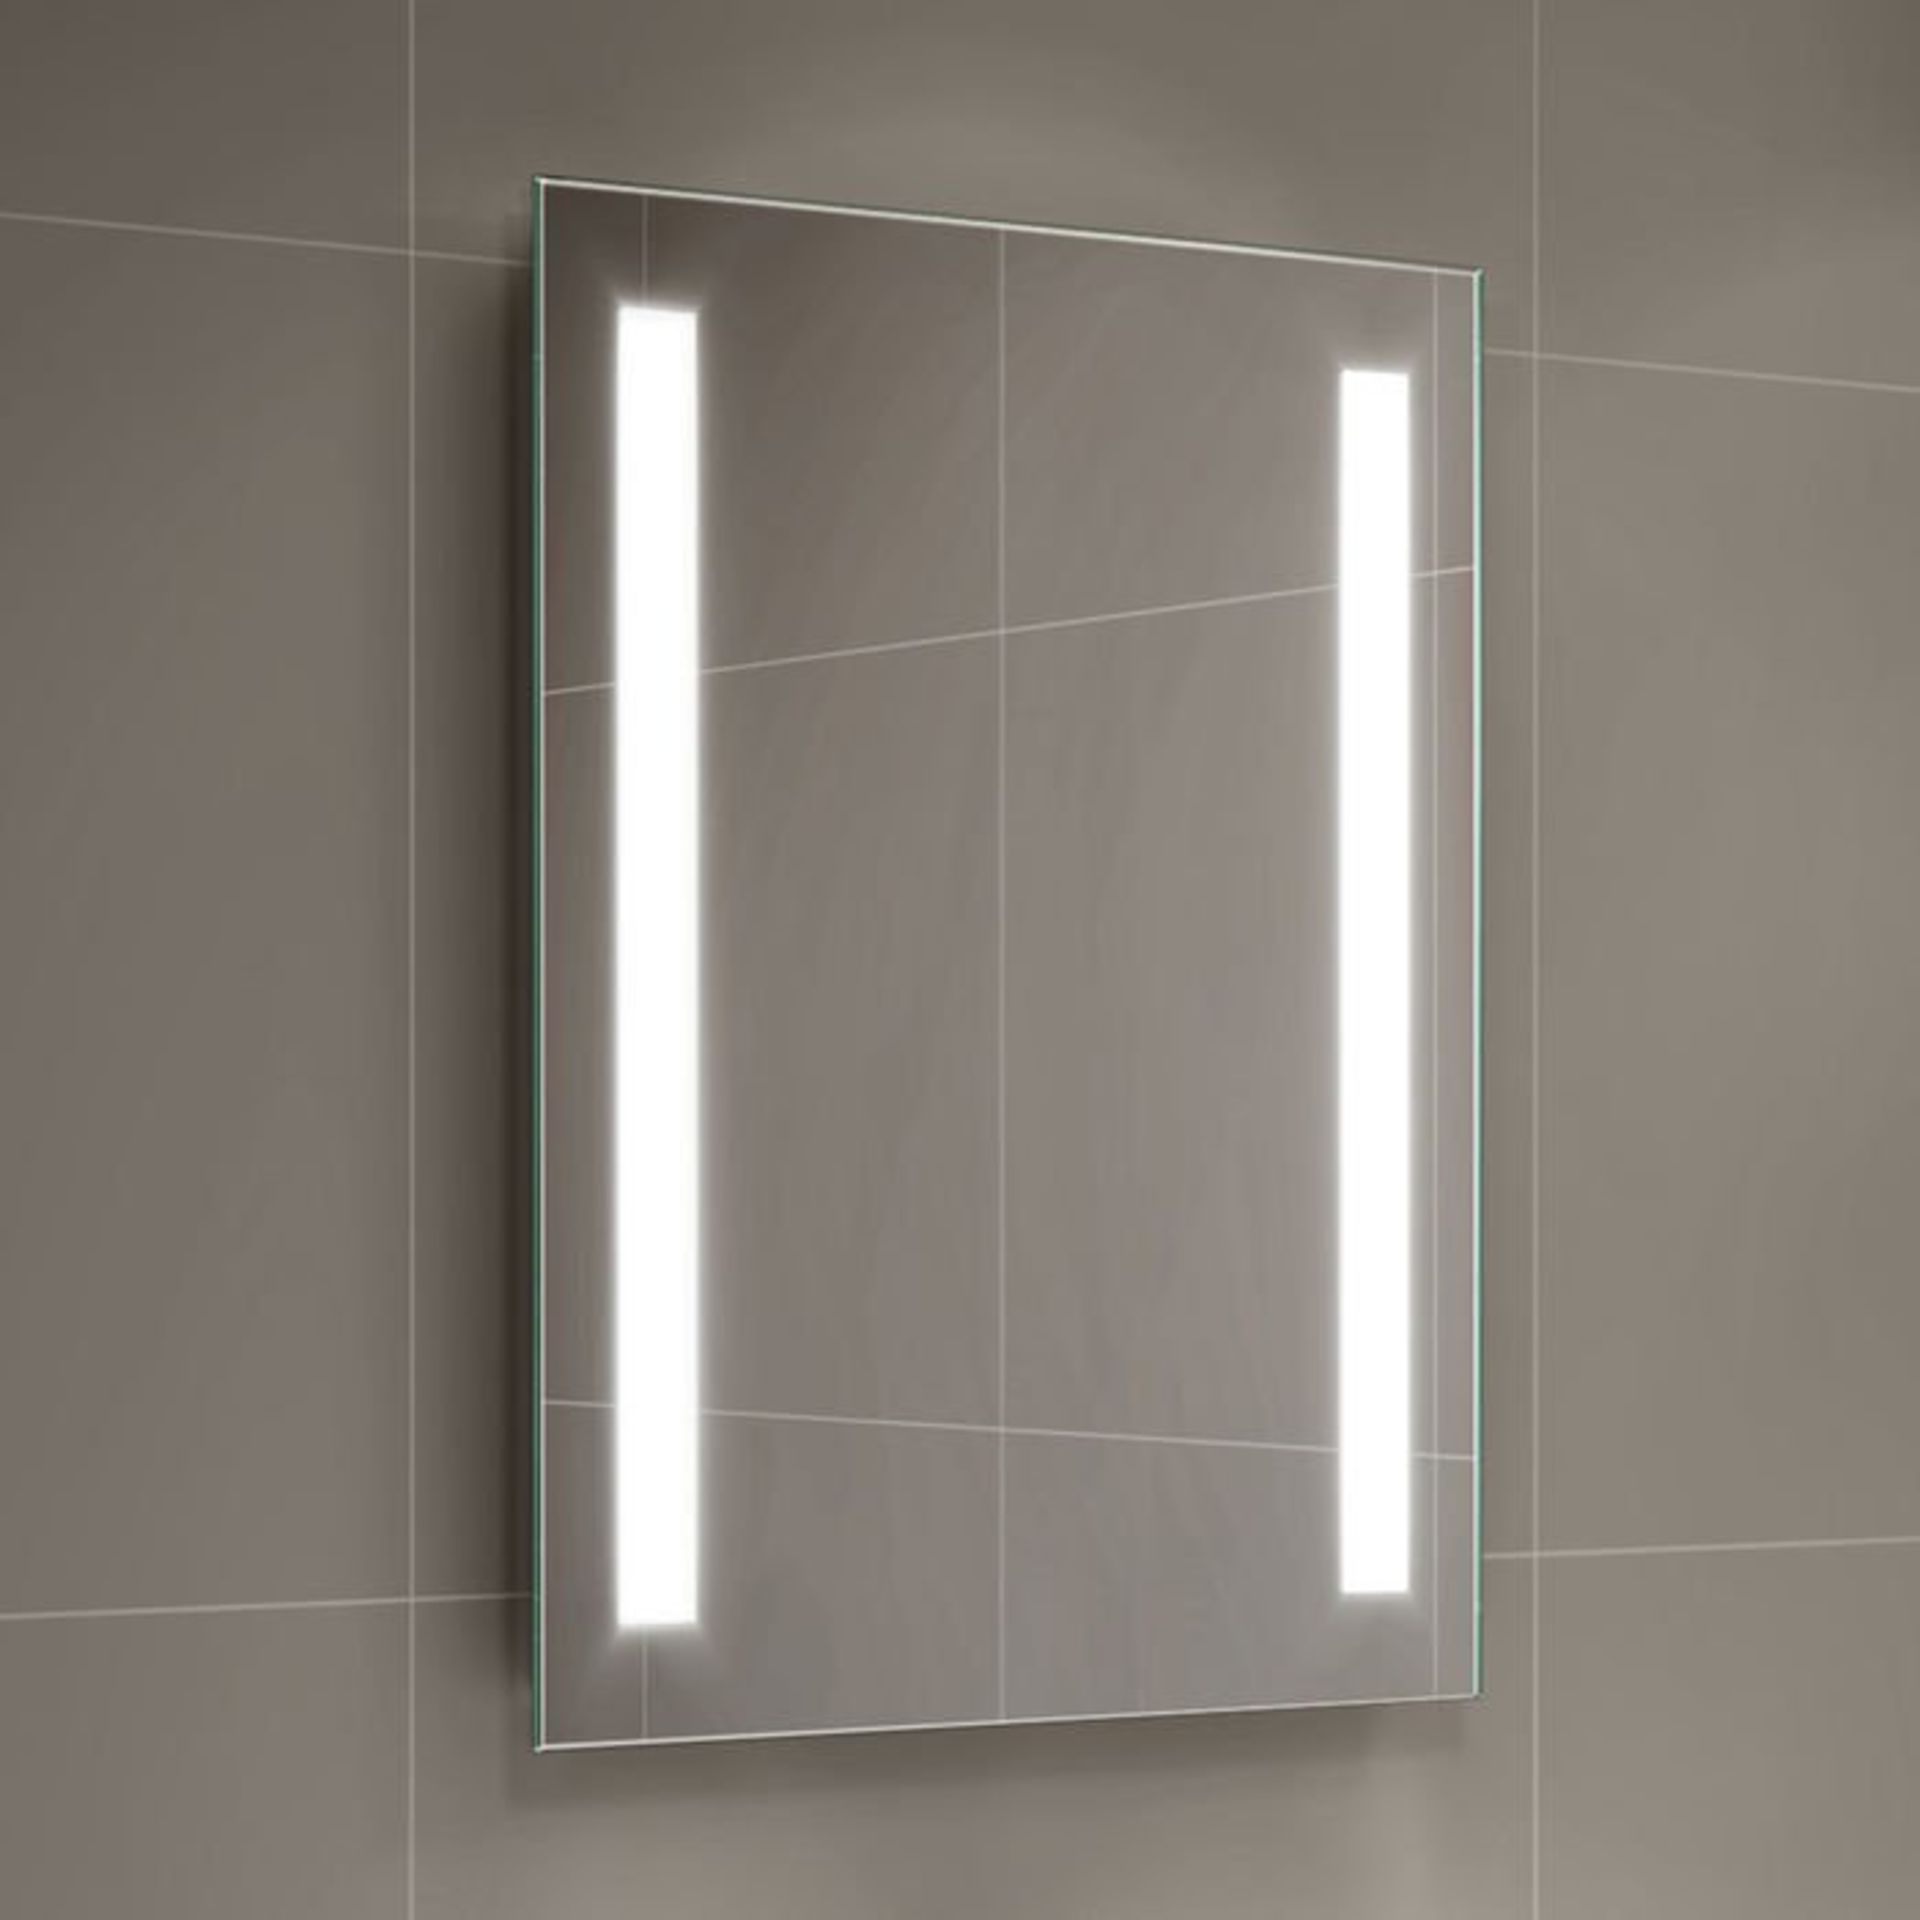 (H210) 500x700mm Omega LED Mirror - Battery Operated. Energy saving controlled On / Off switch